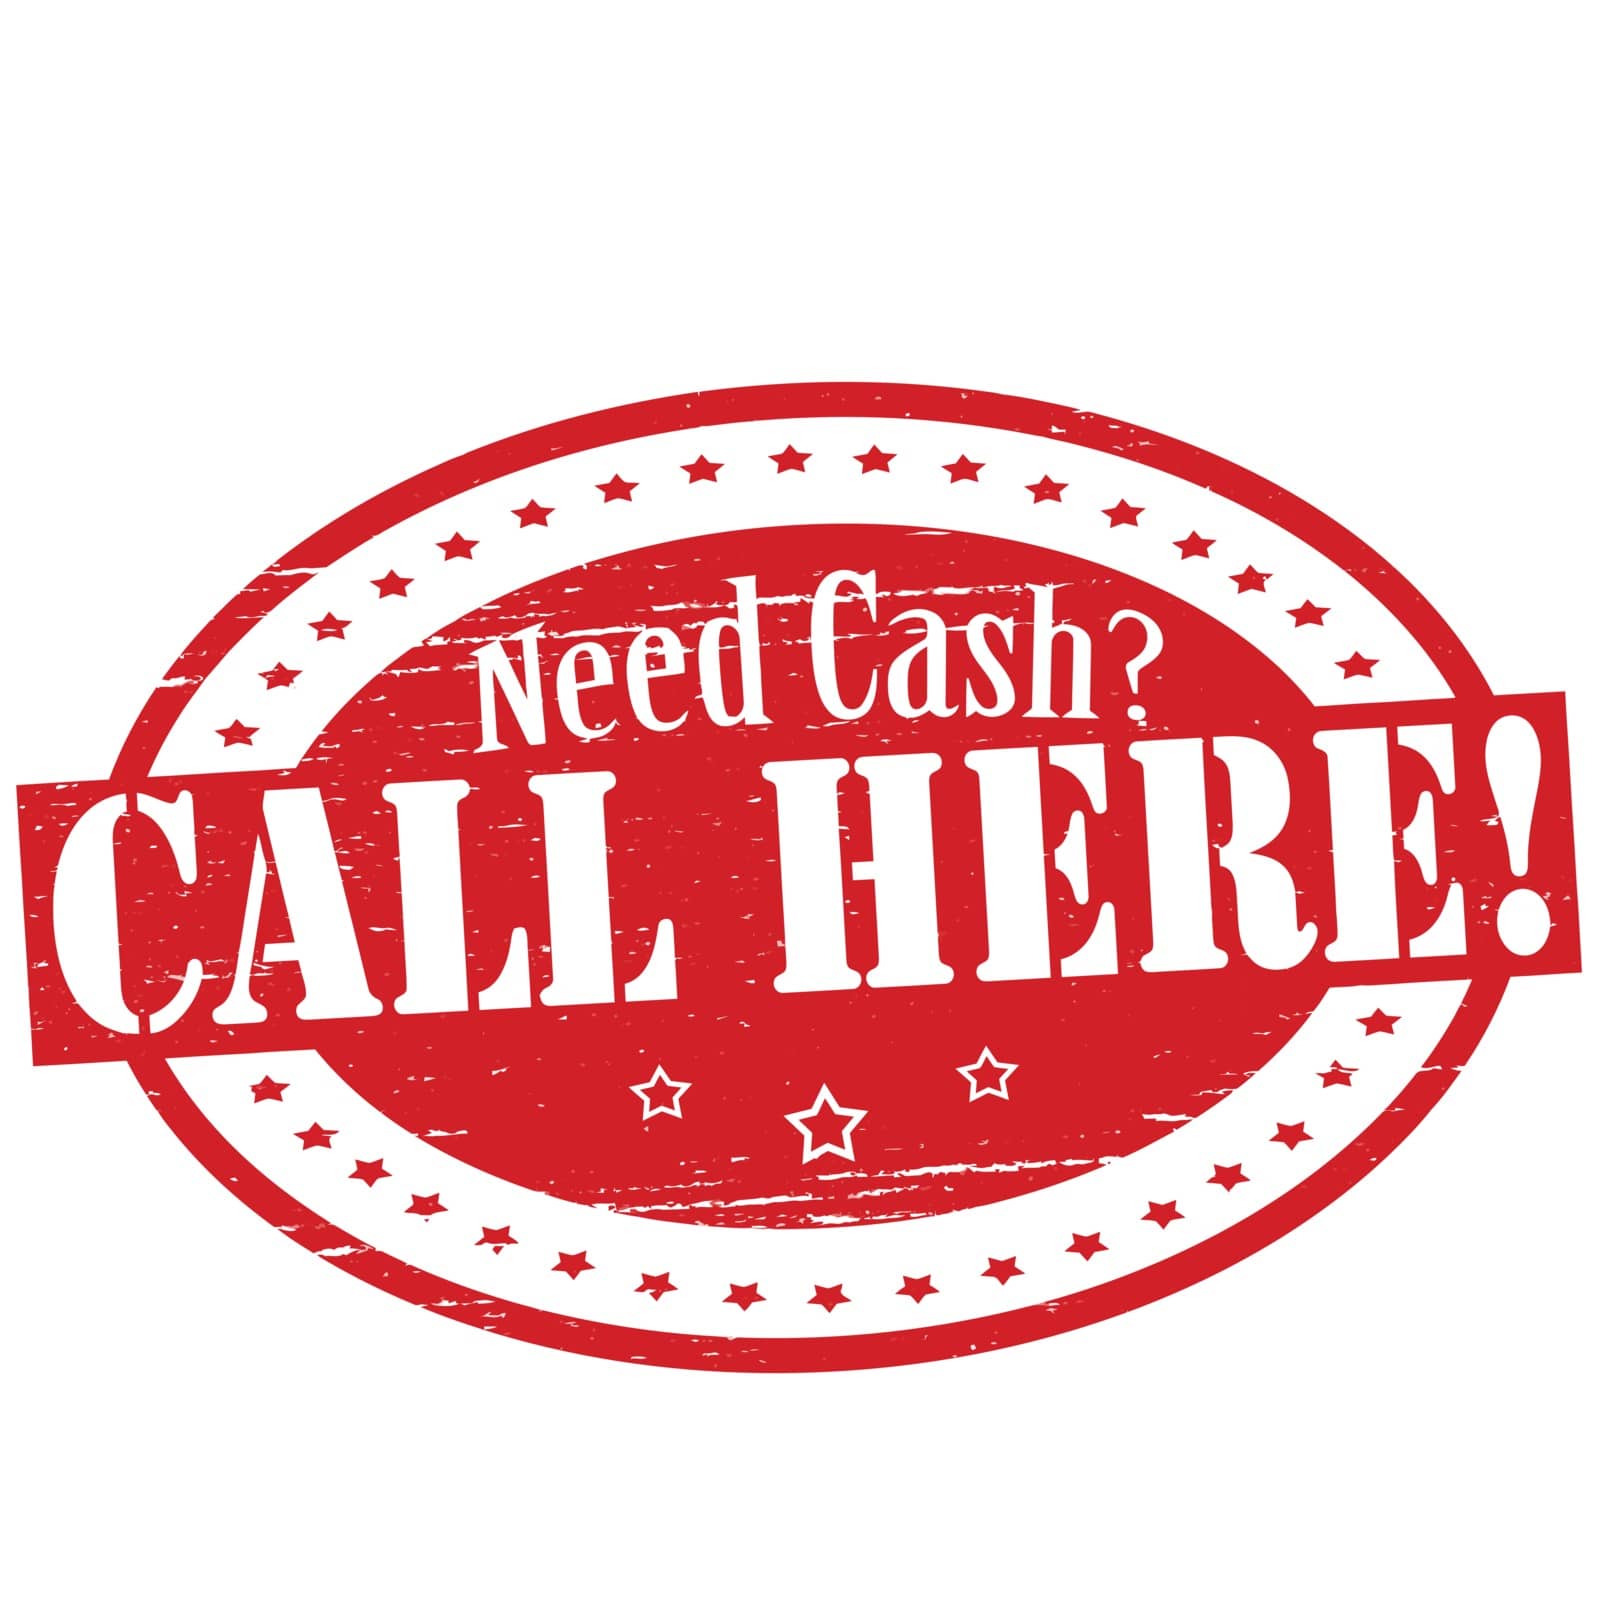 Stamp with text need cash call here inside, vector illustration